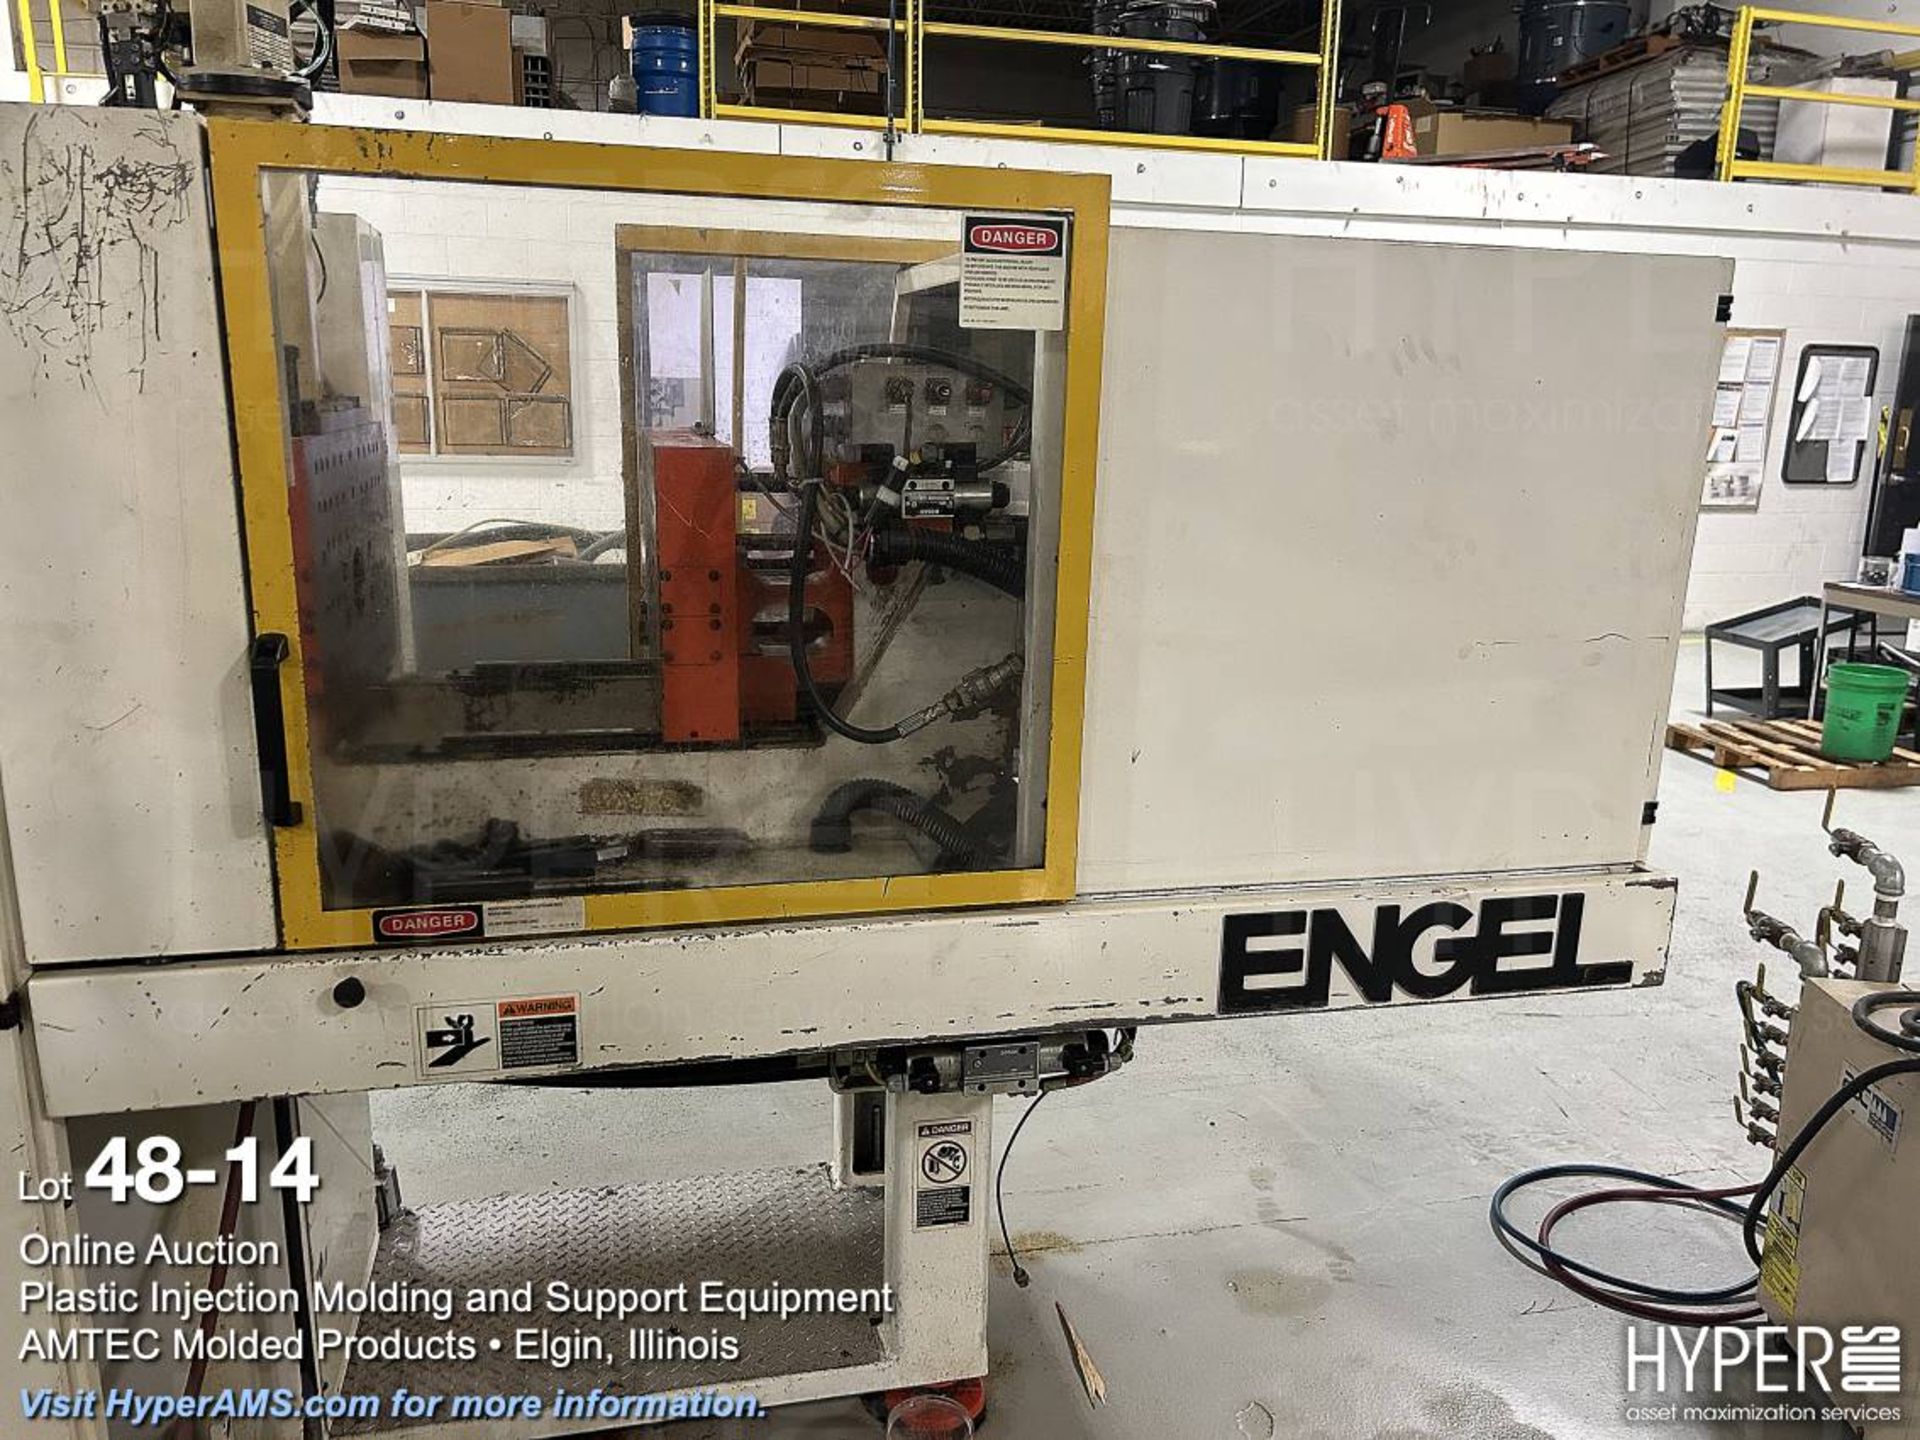 Engel ES200/60TL toggle clamp plastic injection molding machine - Image 14 of 16